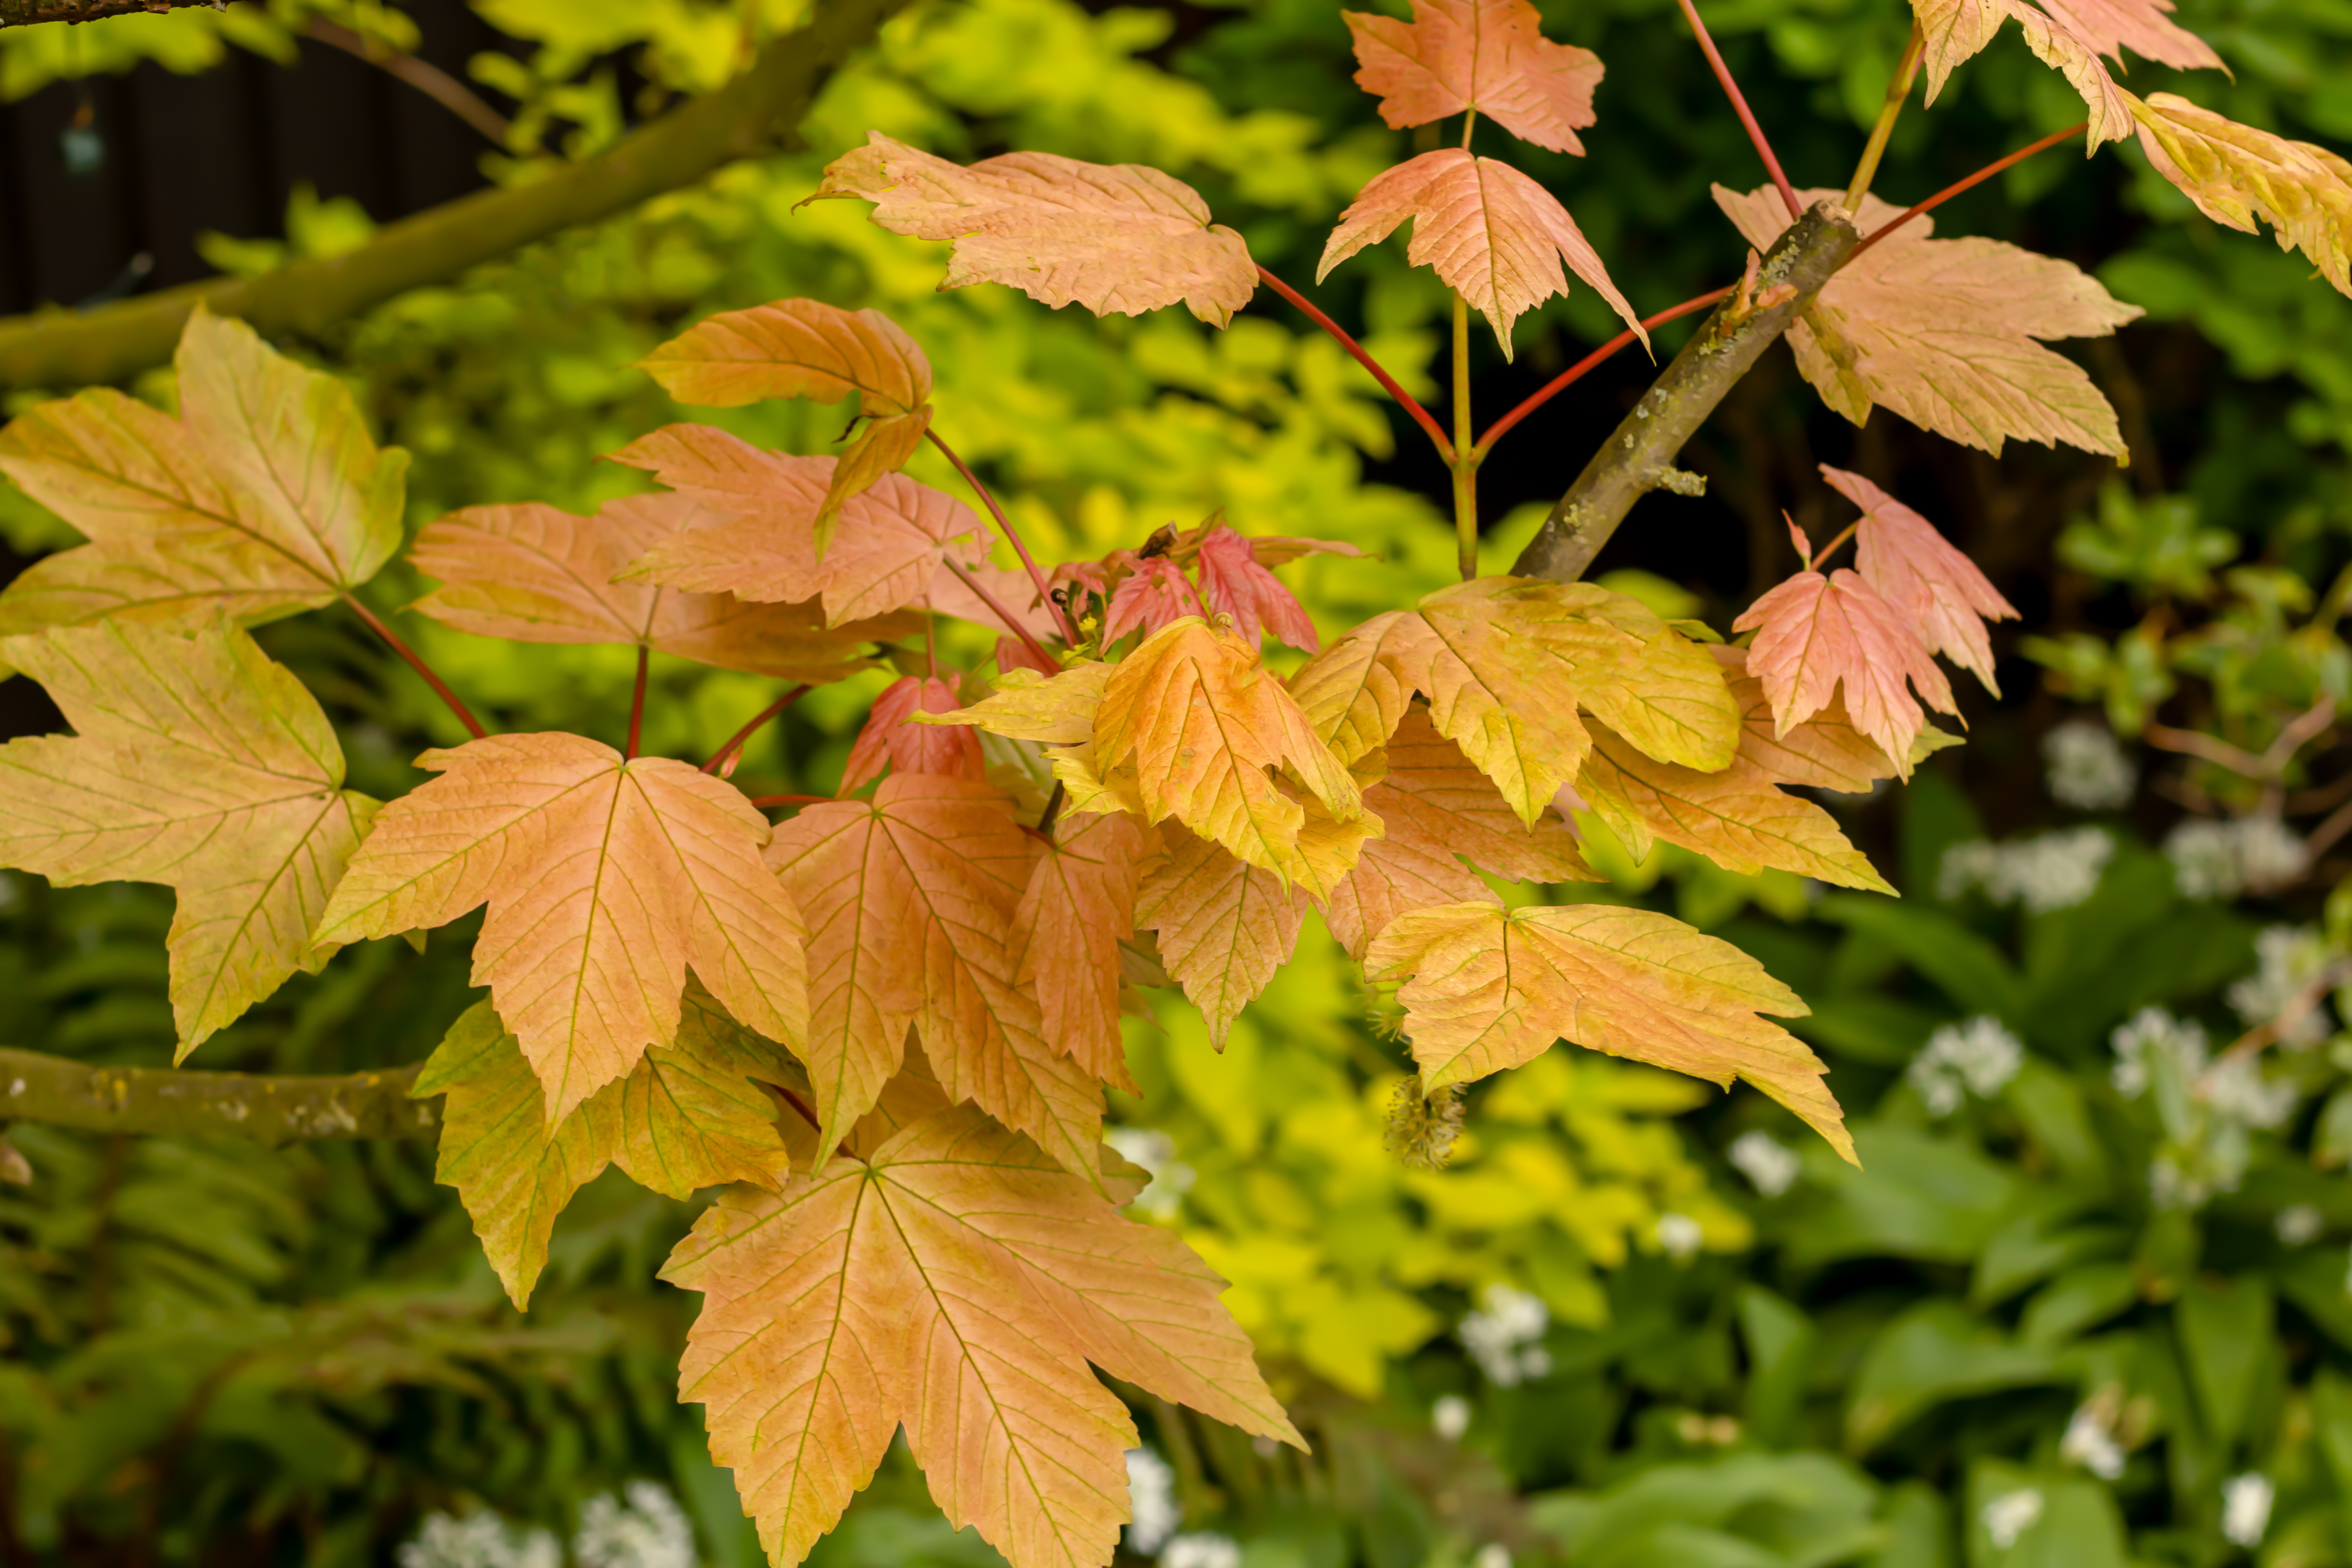 sycamore leaves with autumnal colours of yellow and orange